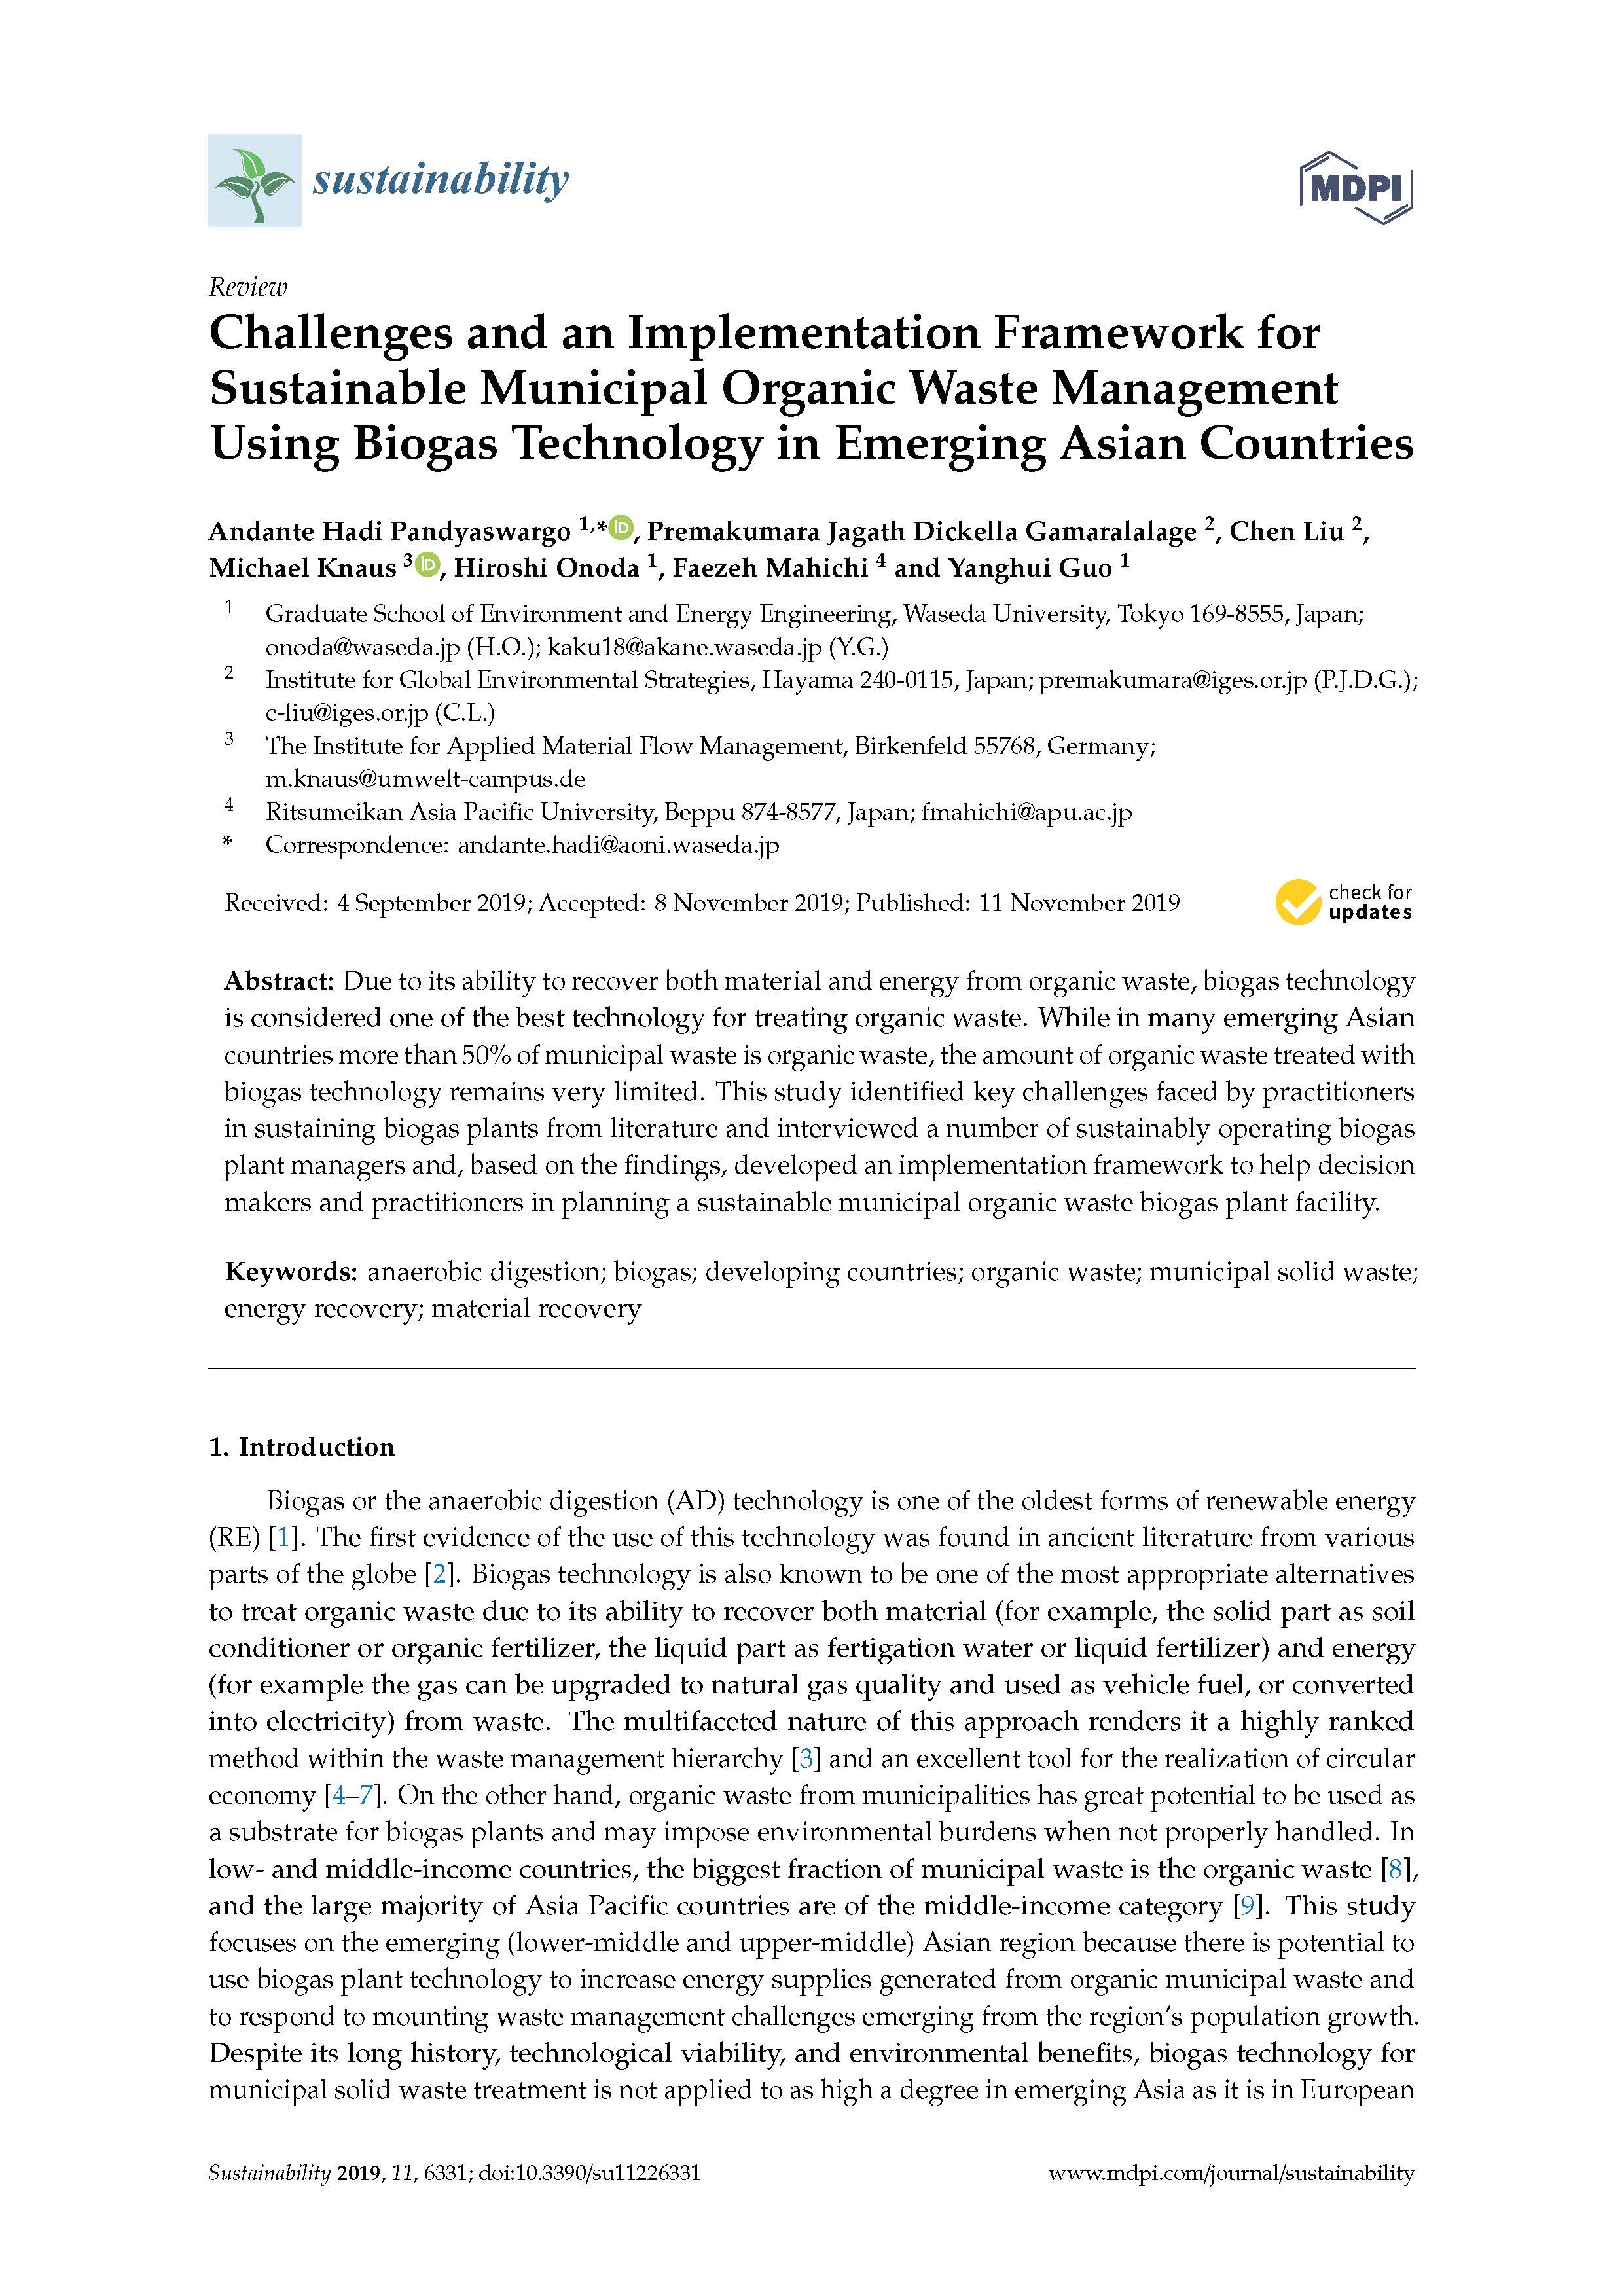 Challenges and an Implementation Framework for Sustainable Municipal Organic Waste Management Using Biogas Technology in Emerging Asian Countries 